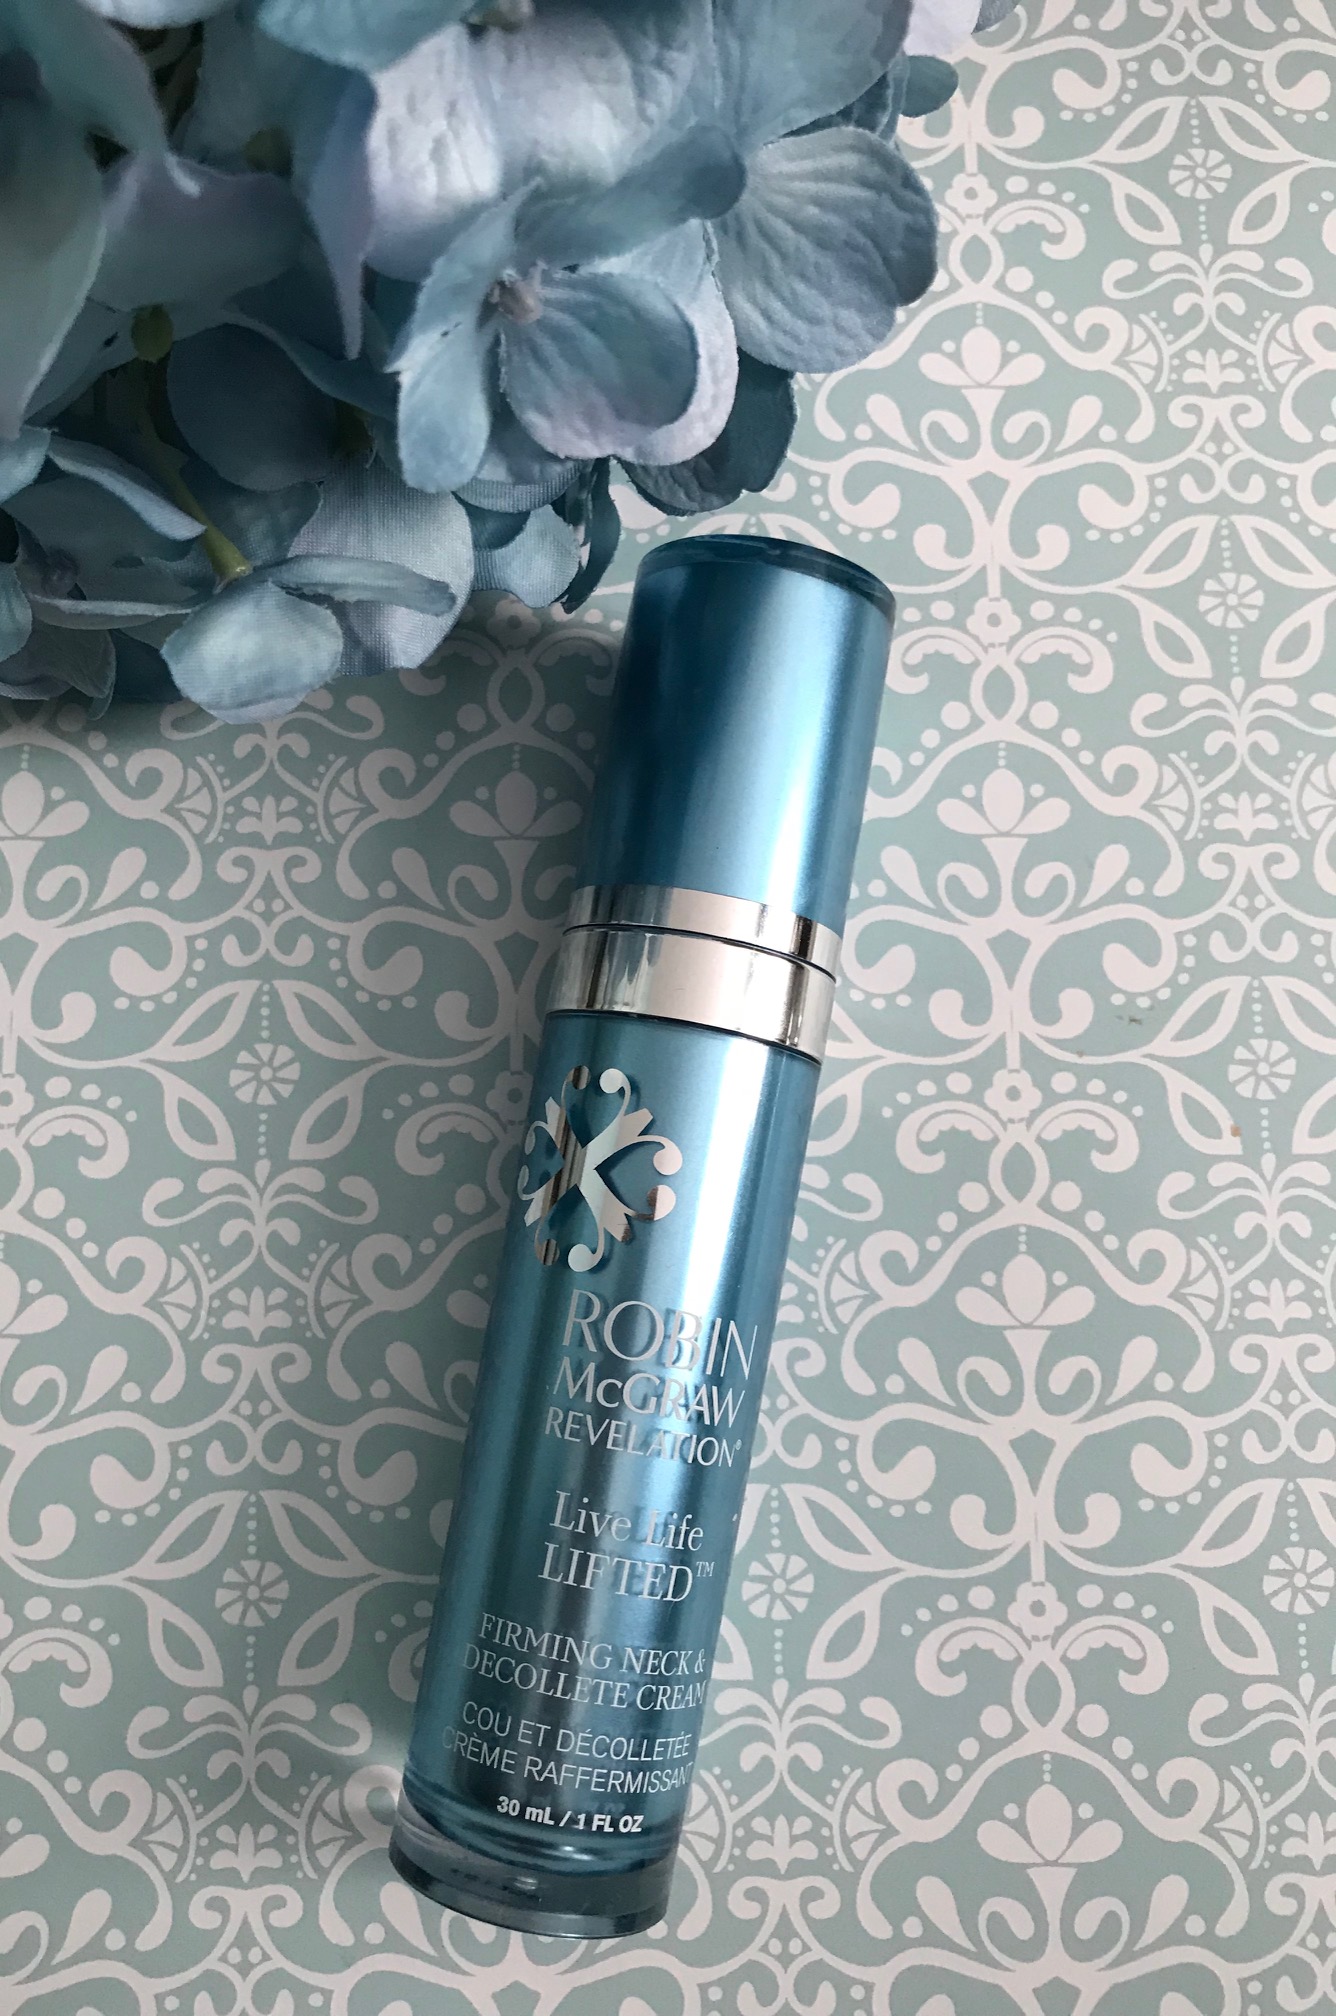 Robin McGraw Live Life Lifted Firming Neck & Decollete Cream, neversaydiebeauty.com